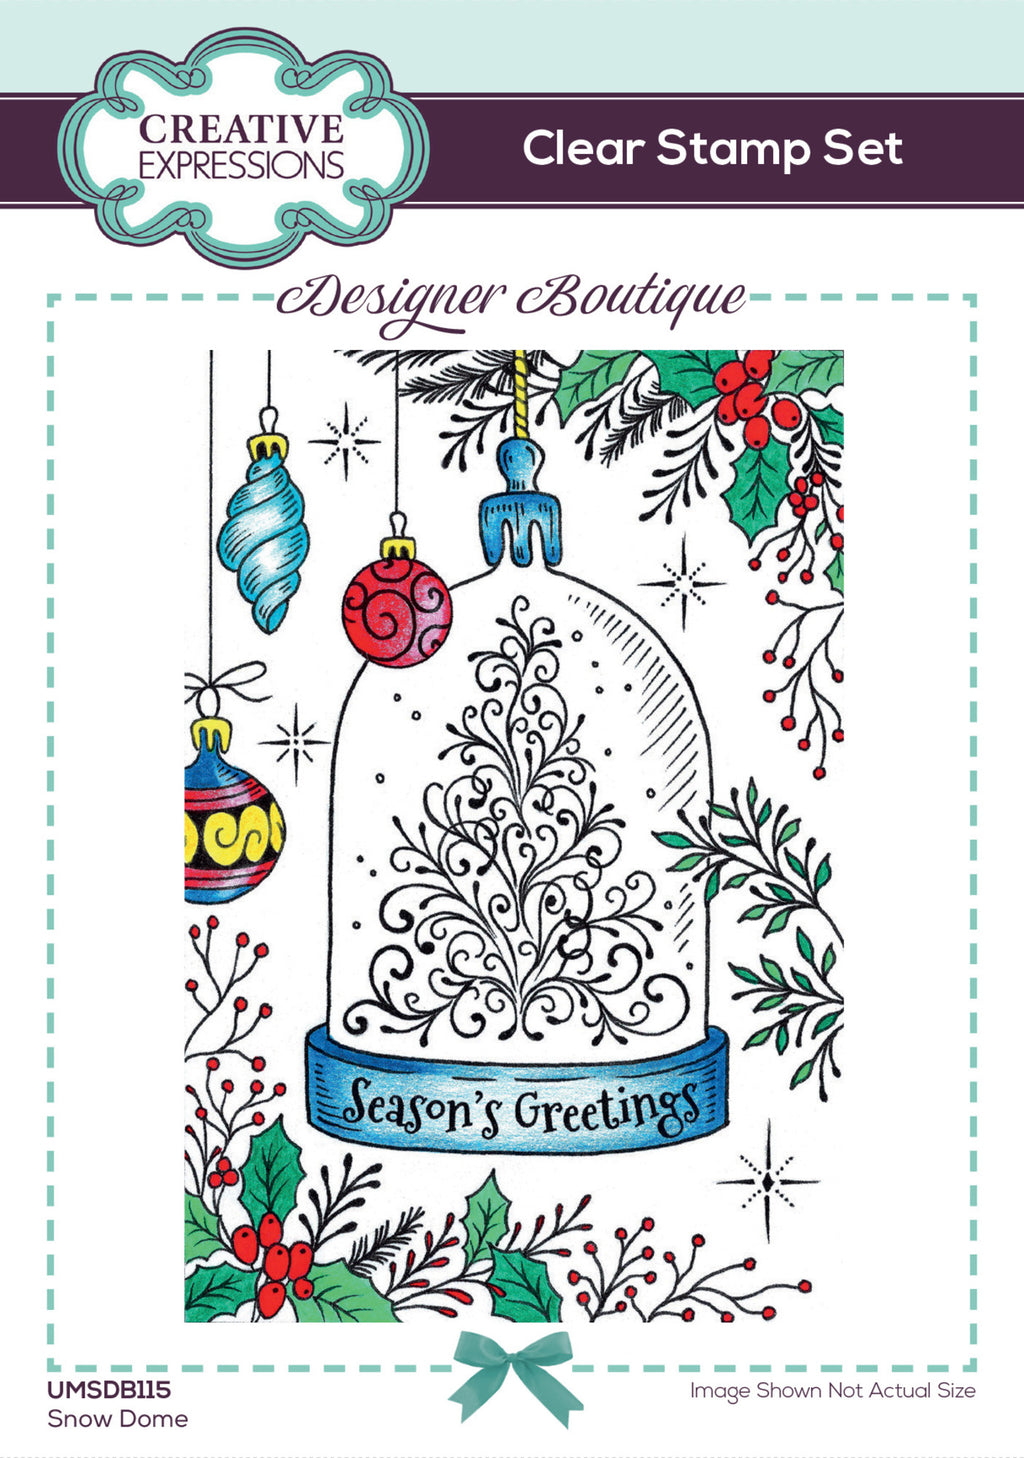 Creative Expressions - A6 - Clear Stamp Set - Designer Boutique - Snow Dome